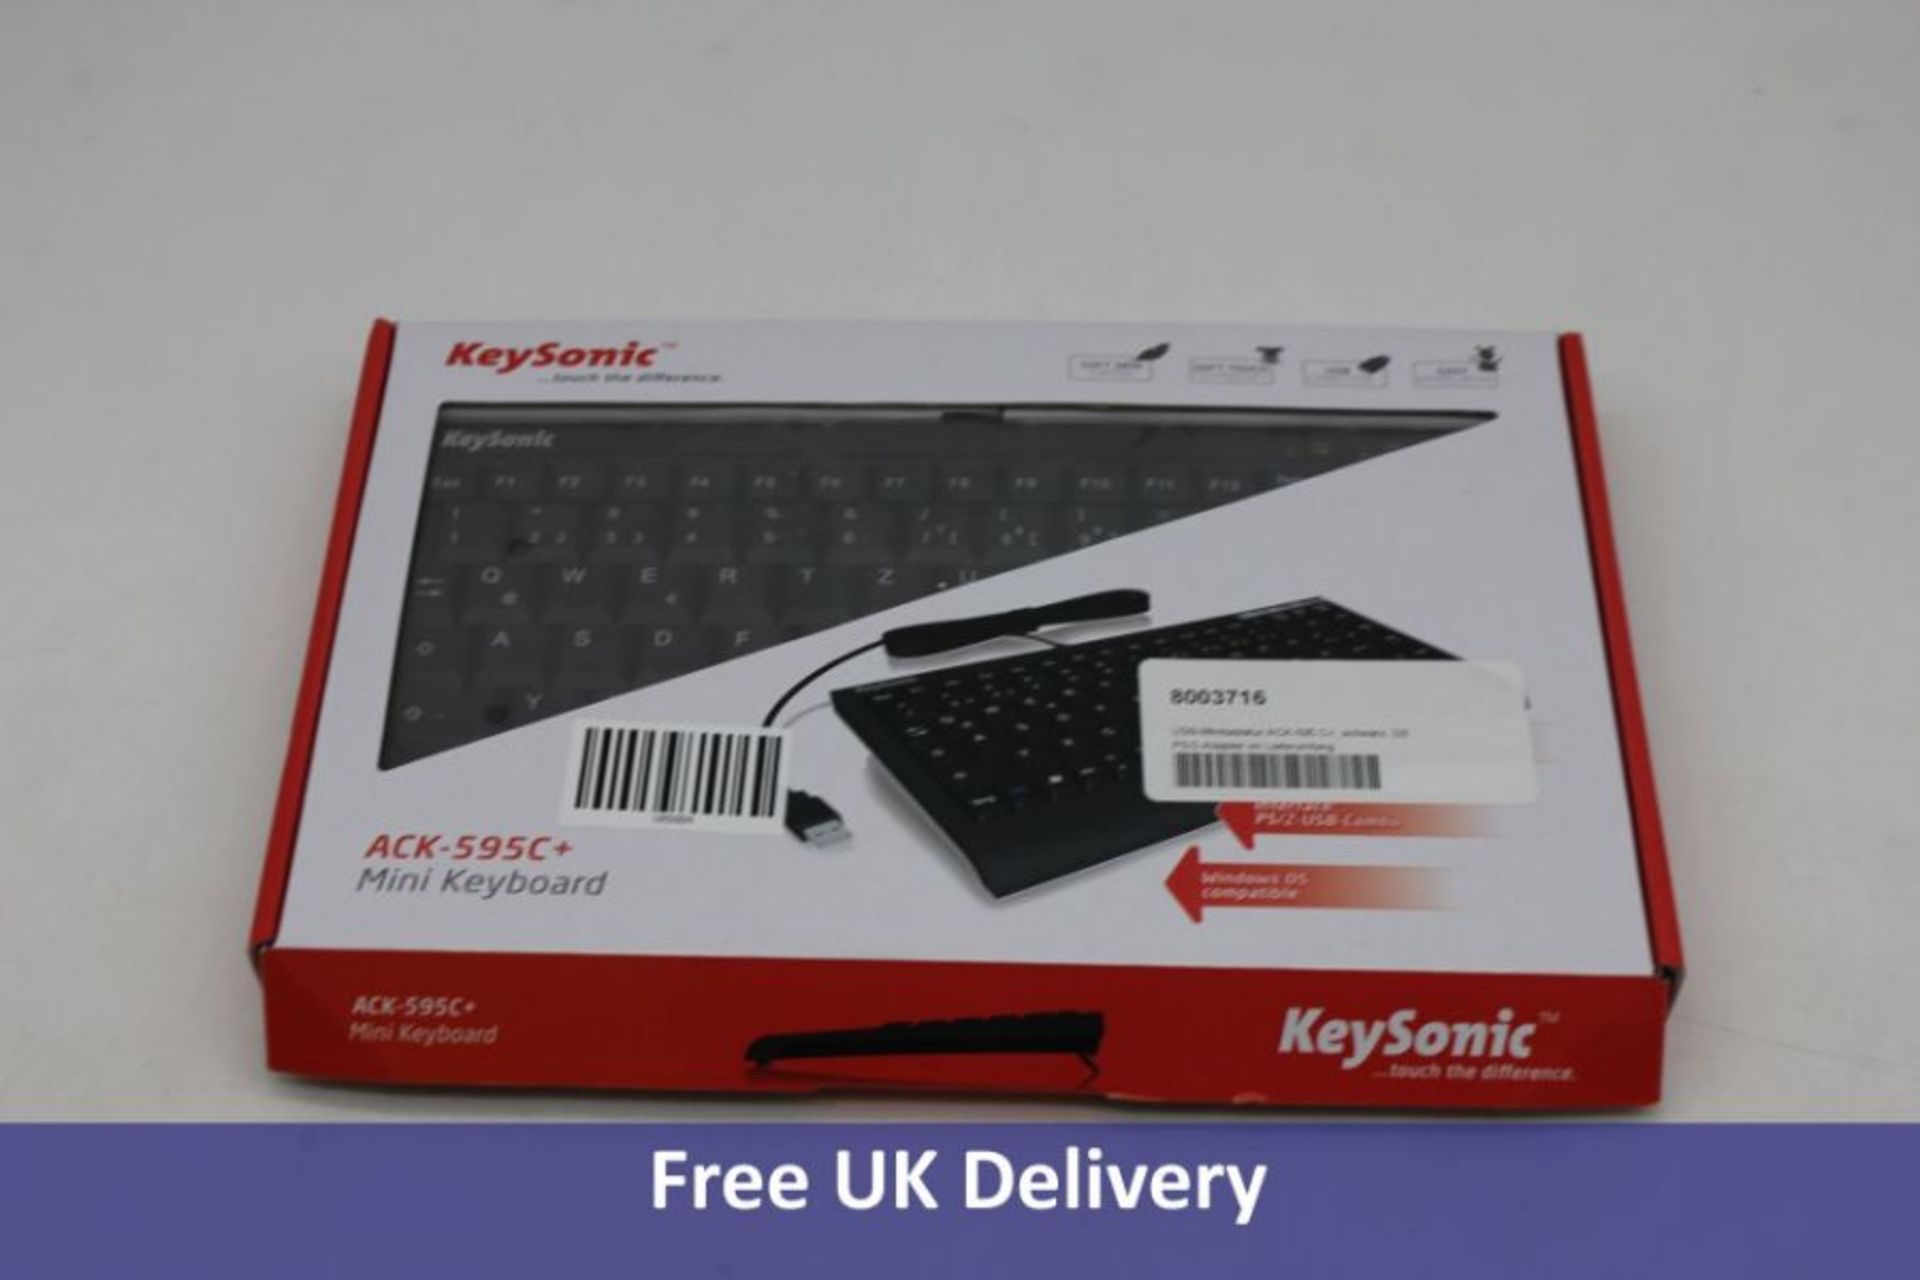 KeySonic ACK-595 C+ Keyboard, USB + PS/2, Home, US English, Wired